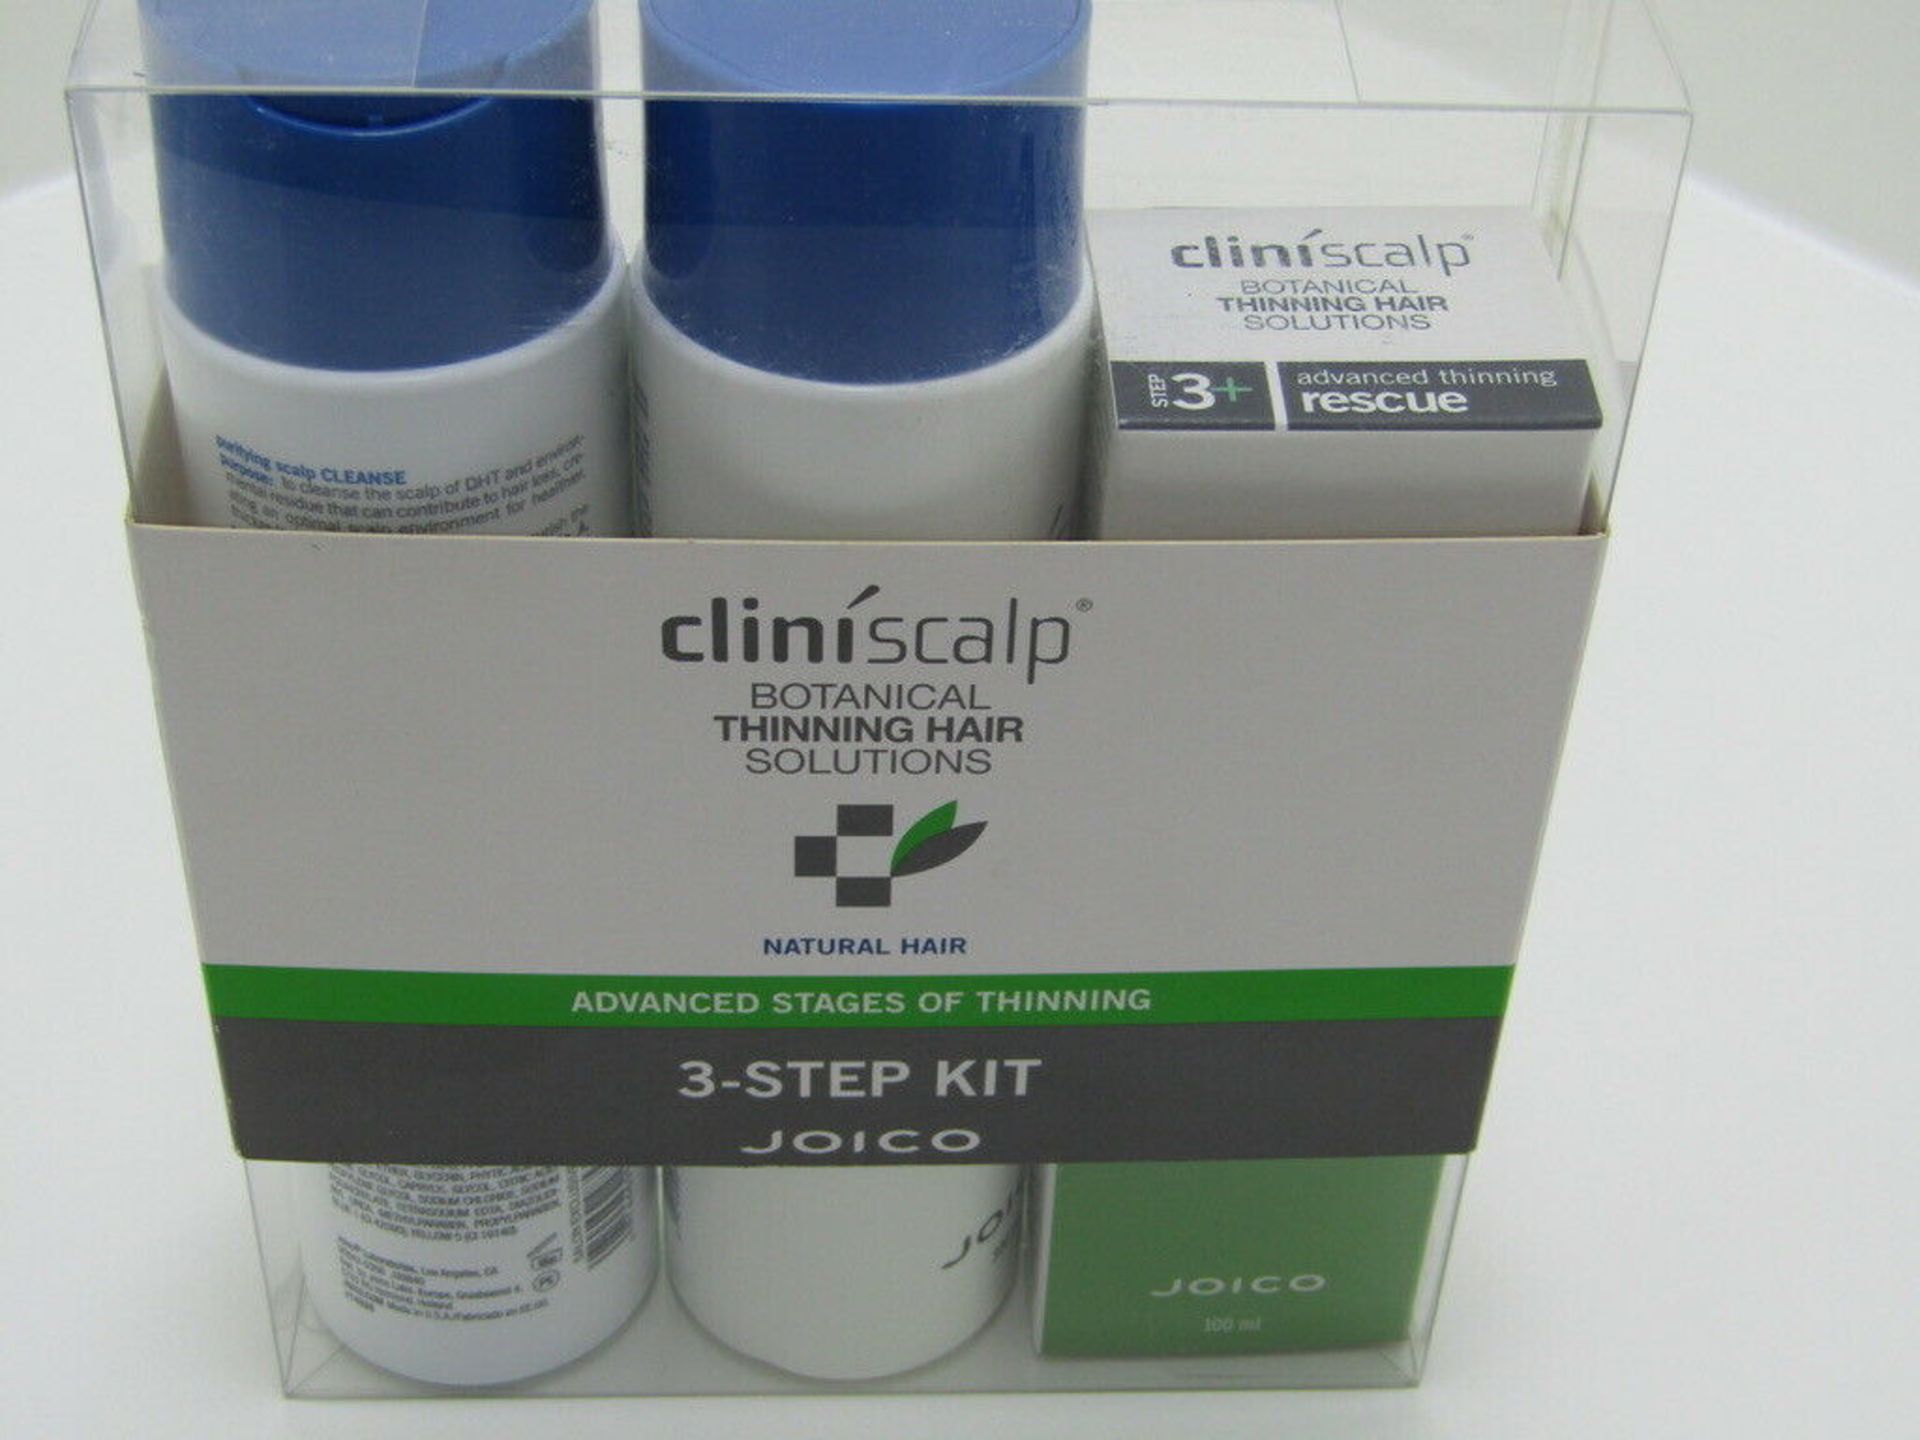 1x Thinning Hair Solution. Cliniscalp 3-Step Kit. Joico Advanced Stage. 700ml - Image 3 of 5